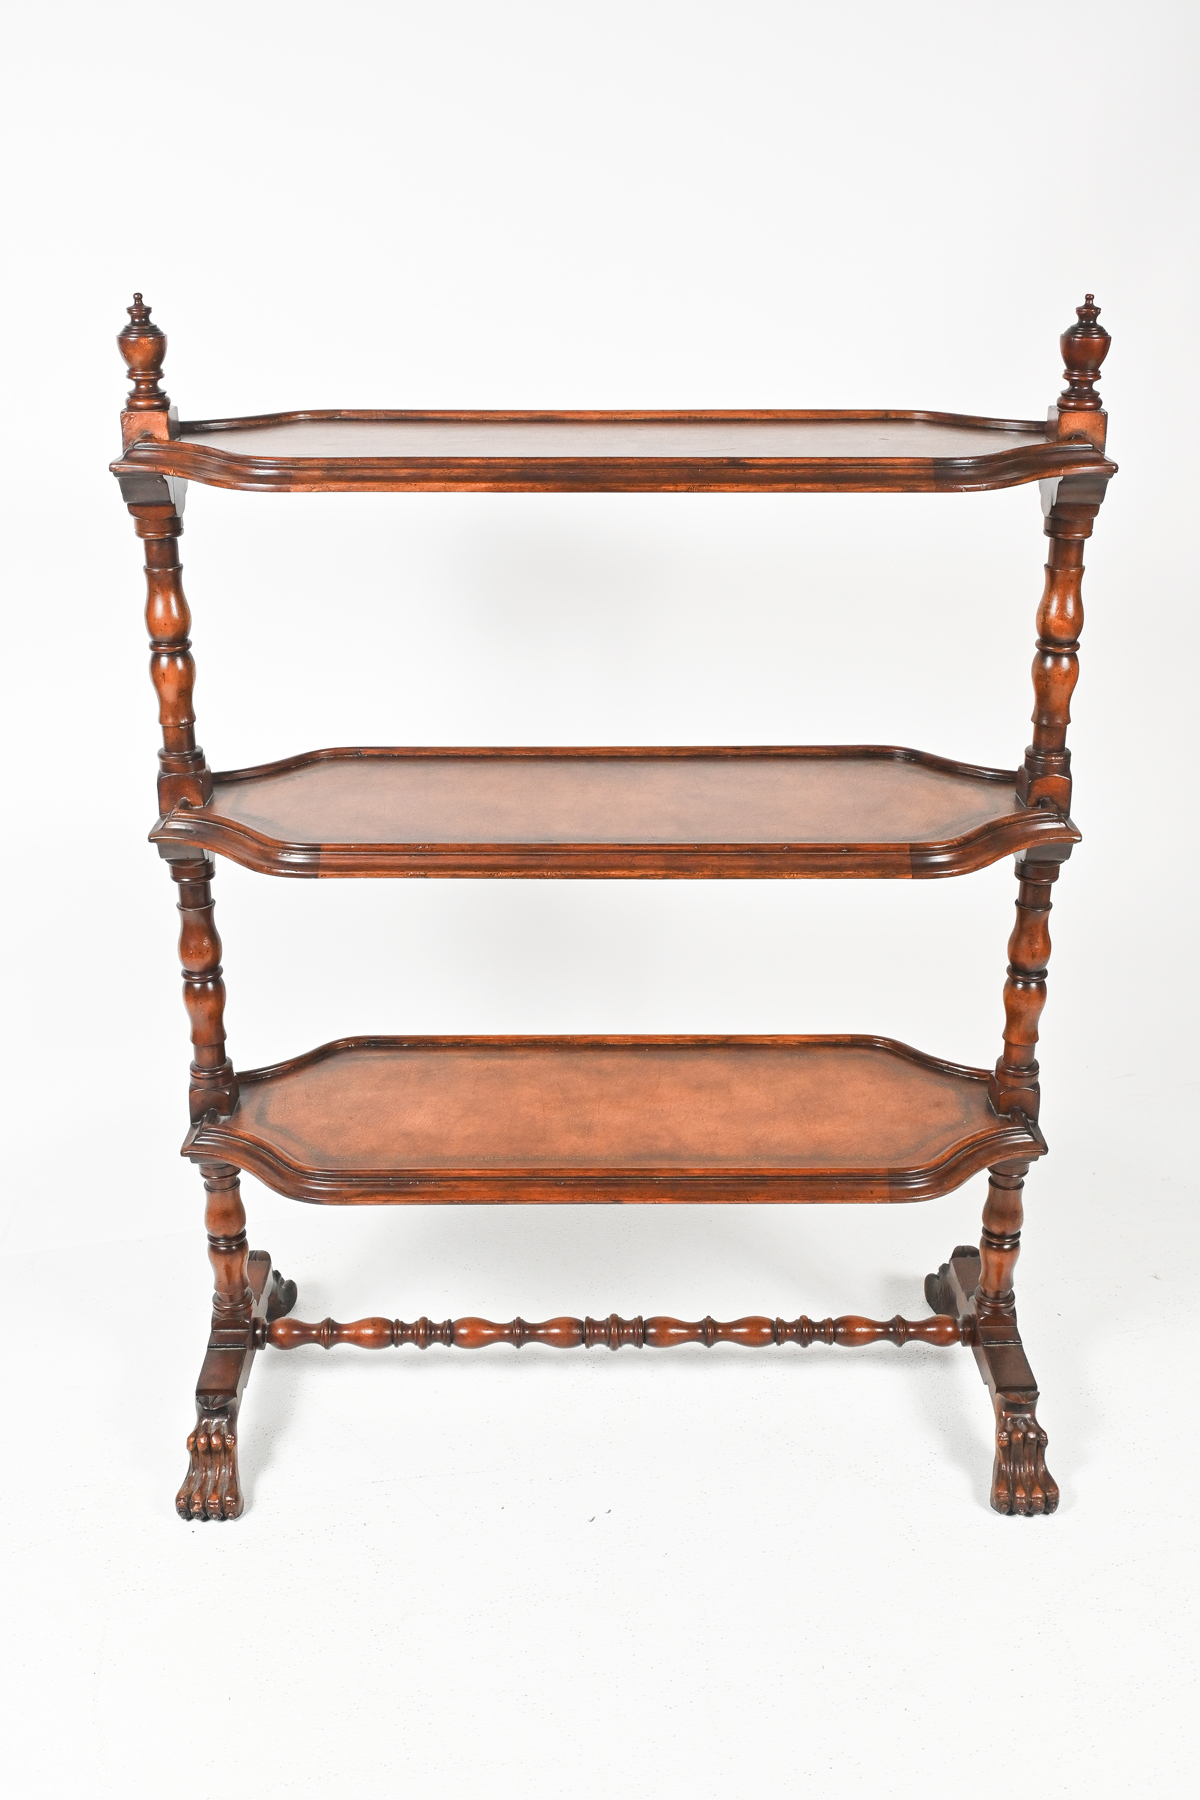 JOHN RICHARDS 3-TIER STAND: A carved